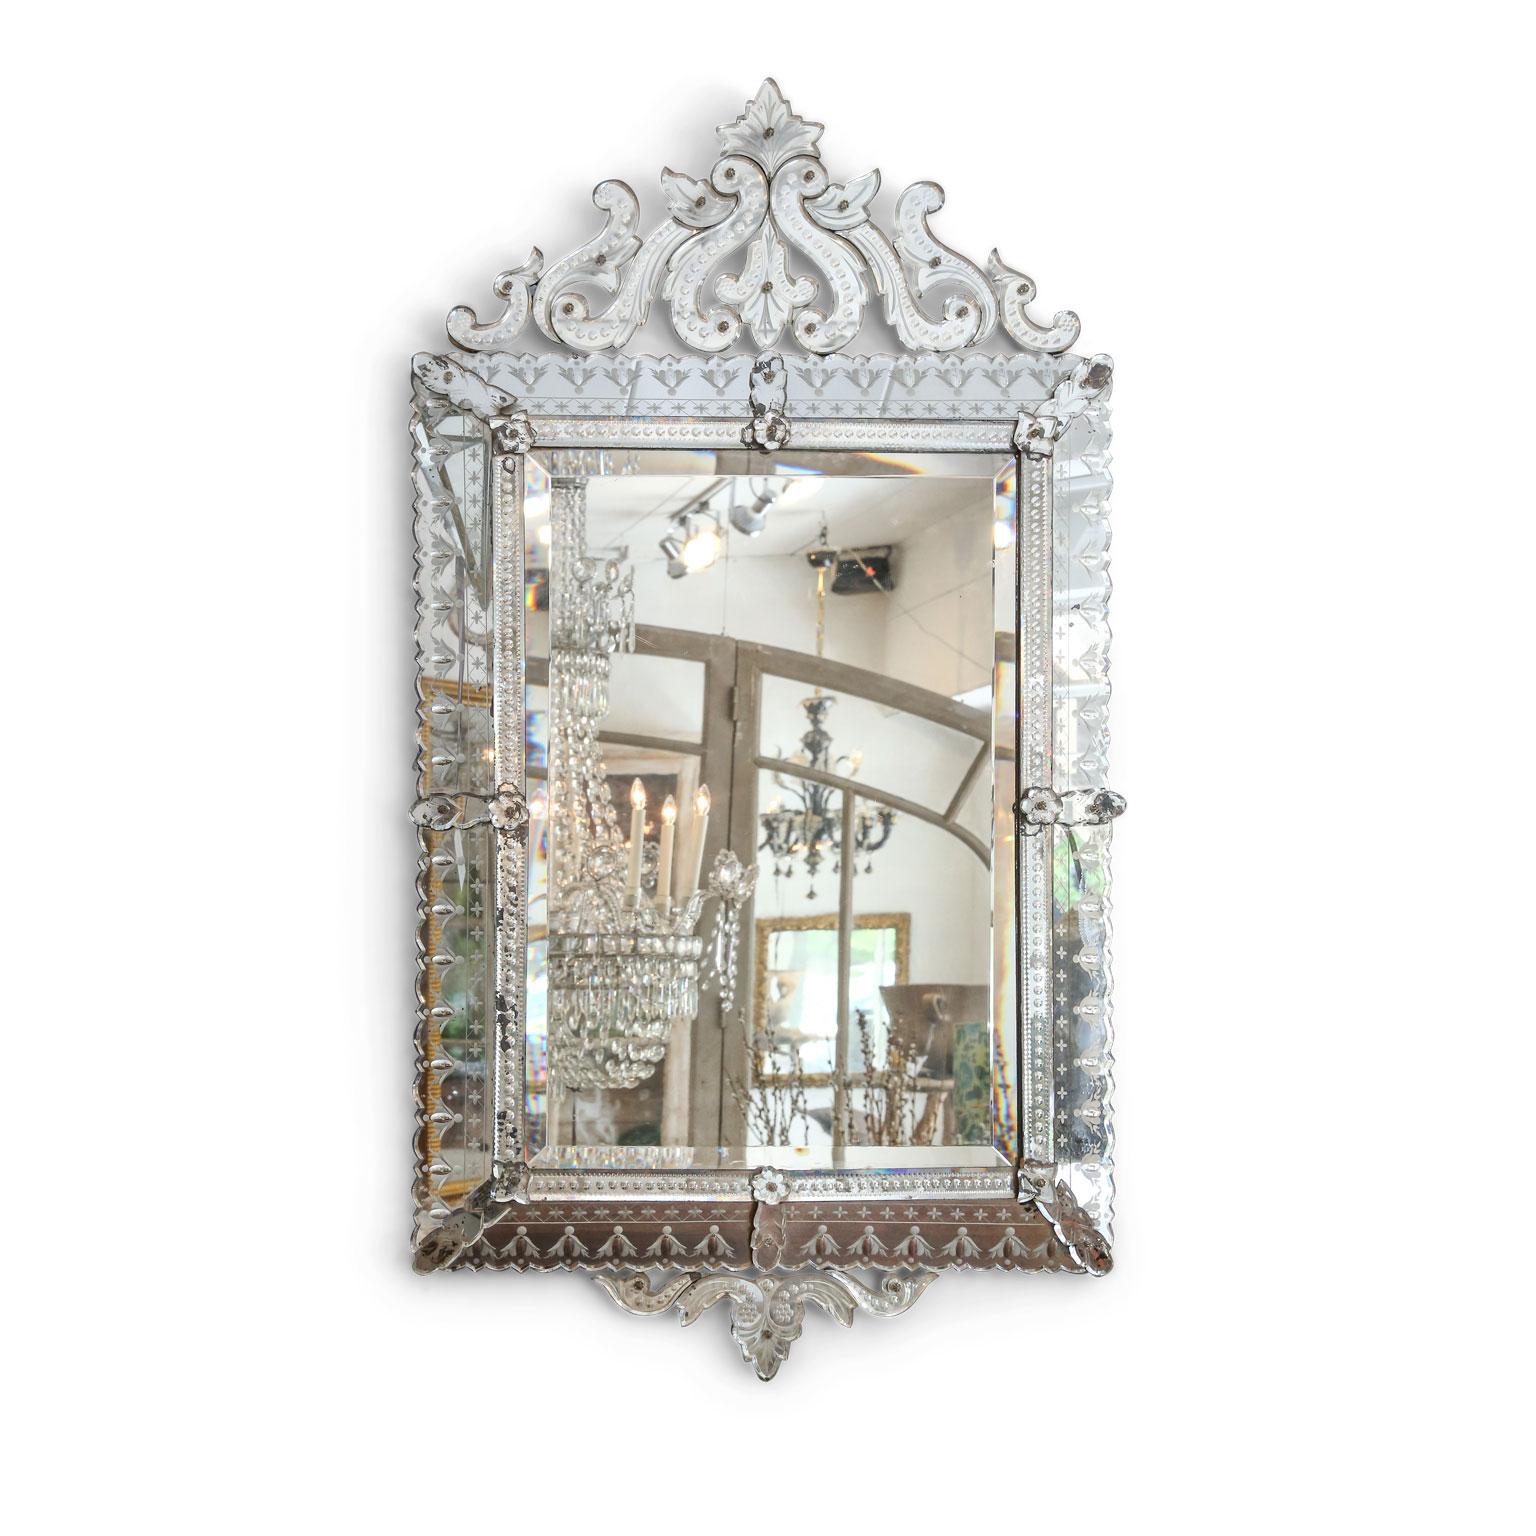 Large rectangular Venetian mirror, (circa 1870-1880). Topped by elaborate openwork pediment. Exceptional condition with only minor losses to its silvered mirror backing.